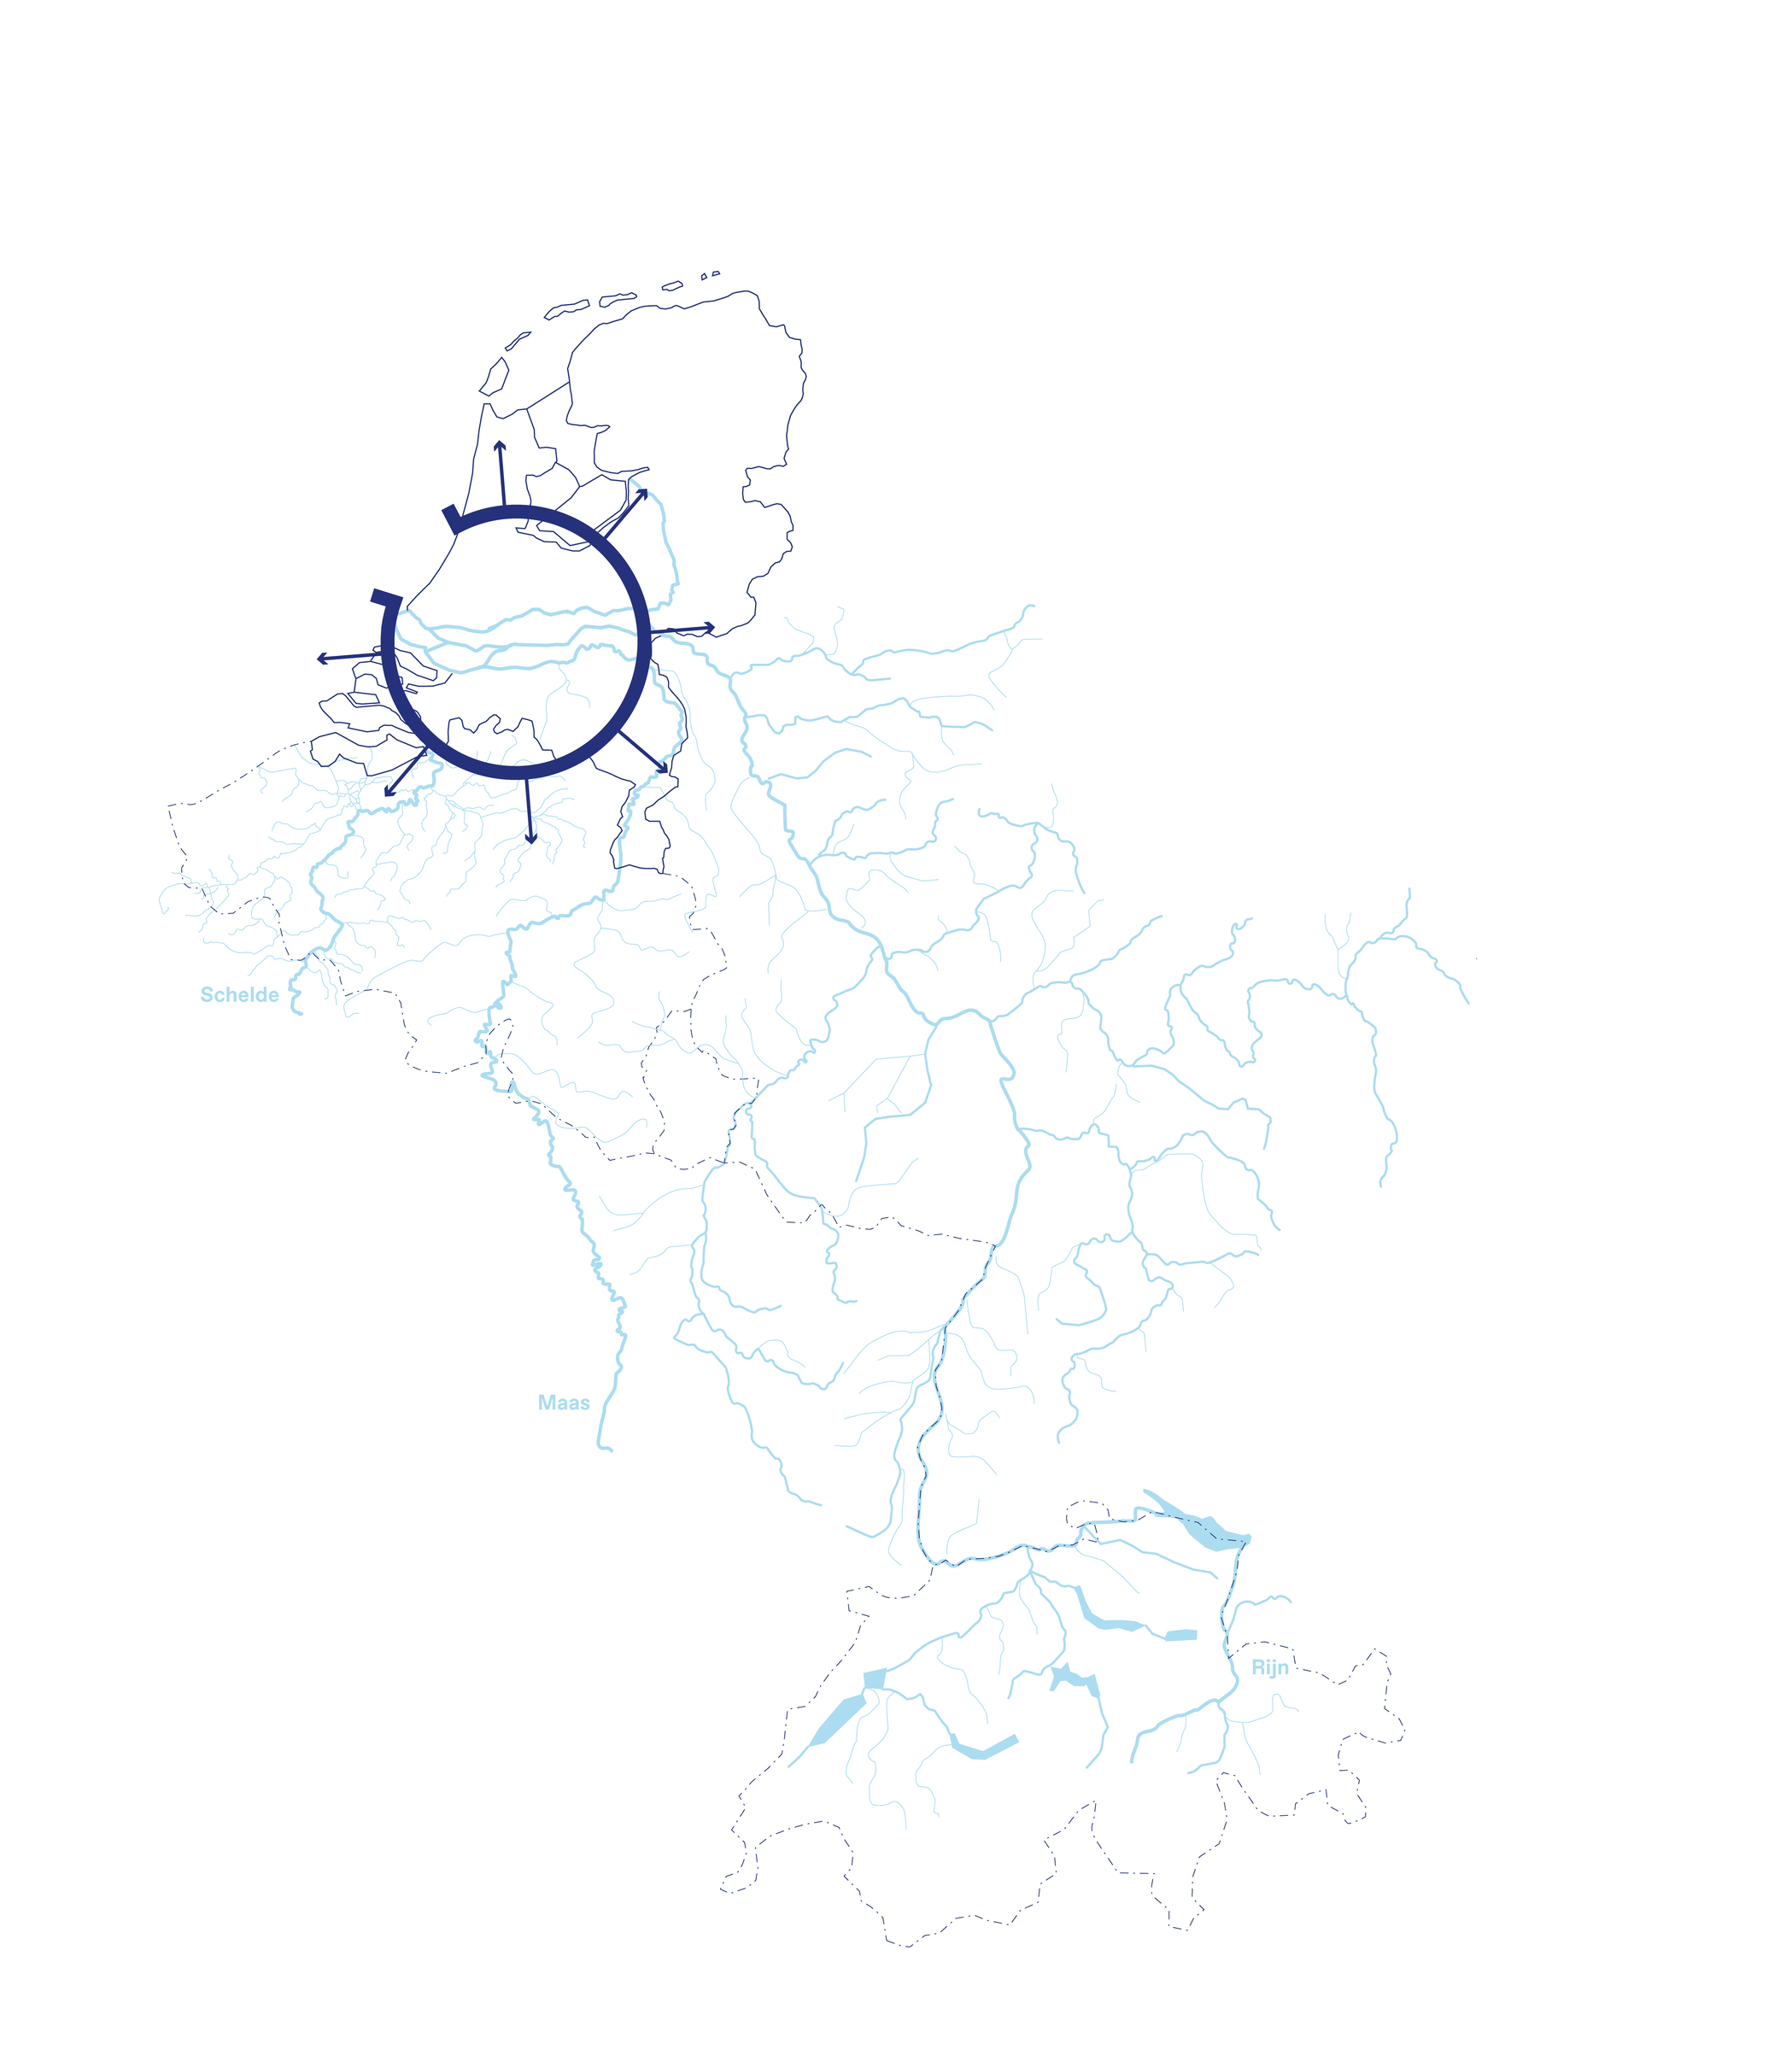 Global position of the section of the Dutch delta, looking towards the catchment areas of the Rhine, Meuse and Scheldt river. 